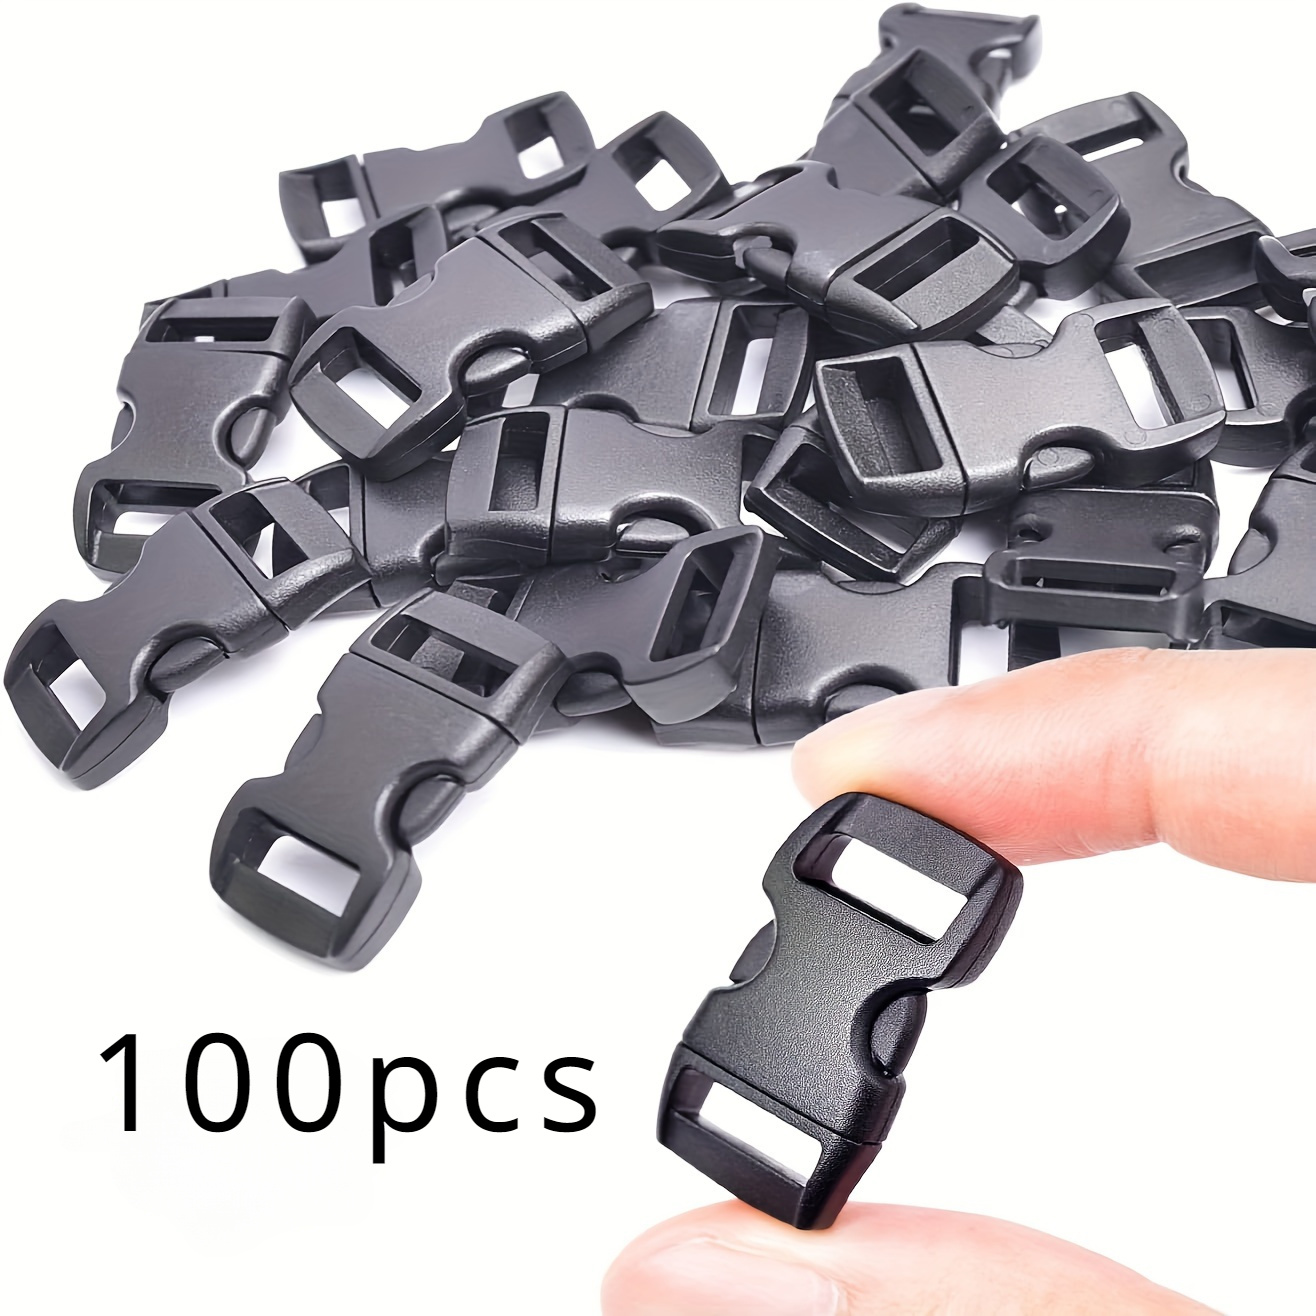 

100pcs, Plastic Quick Release Buckles For Diy Paracord Bracelets And Dog Collar Straps - 3/8 Inch Curved Clips